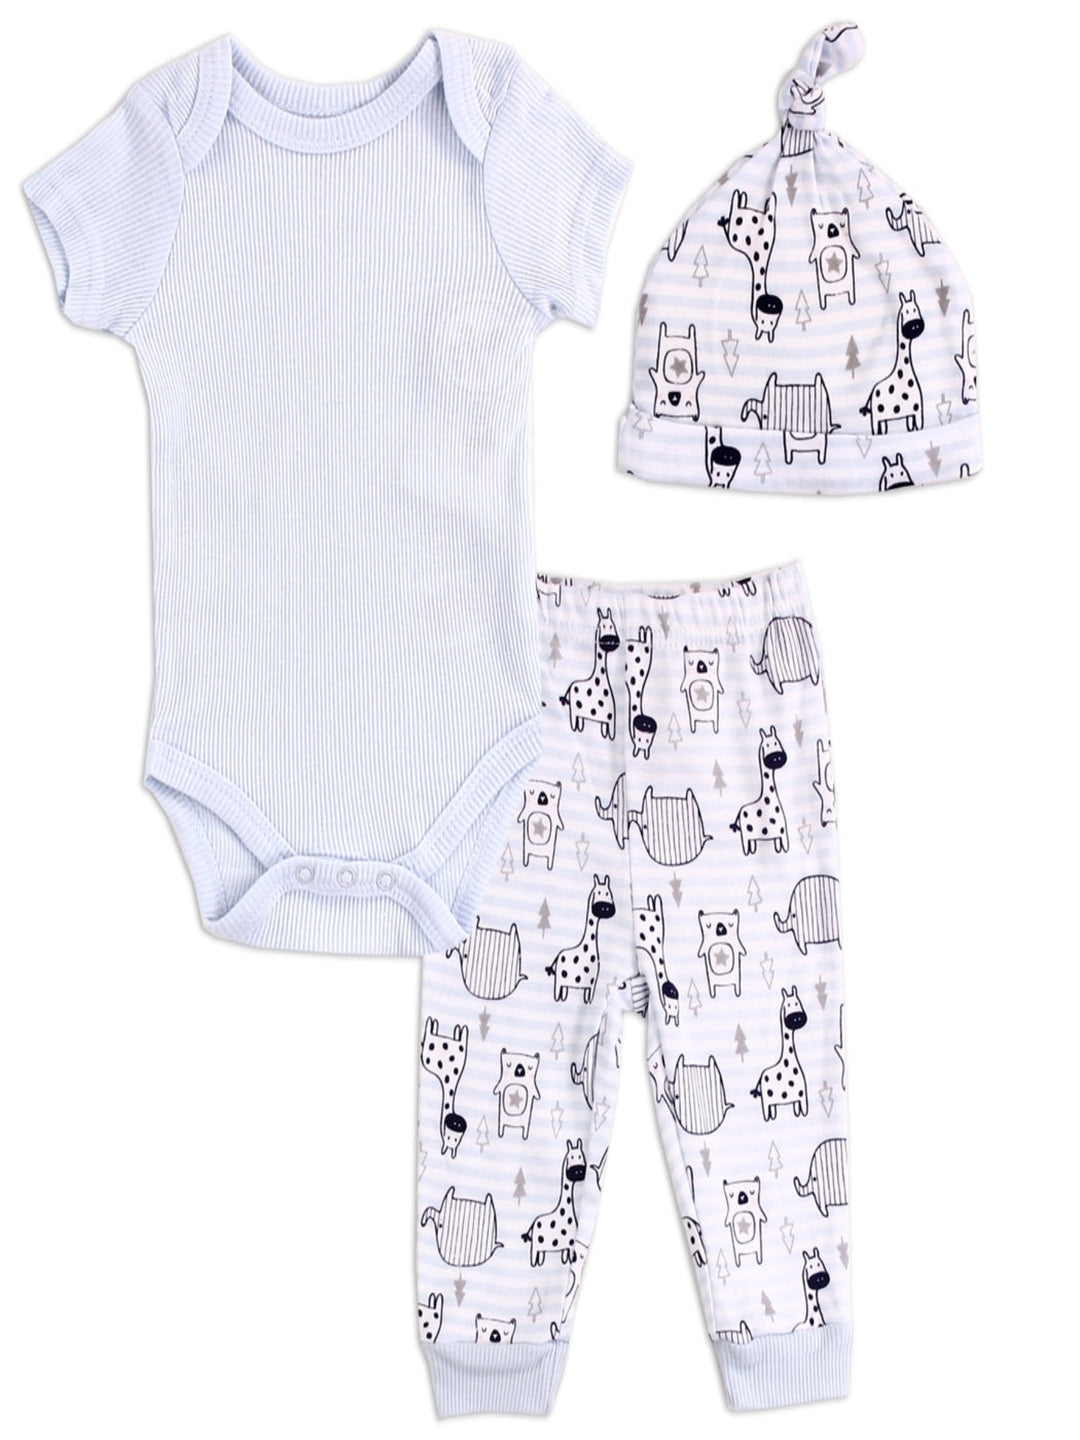 Animal and Stripe Print 3 Piece Baby Outfit, Baby Blue